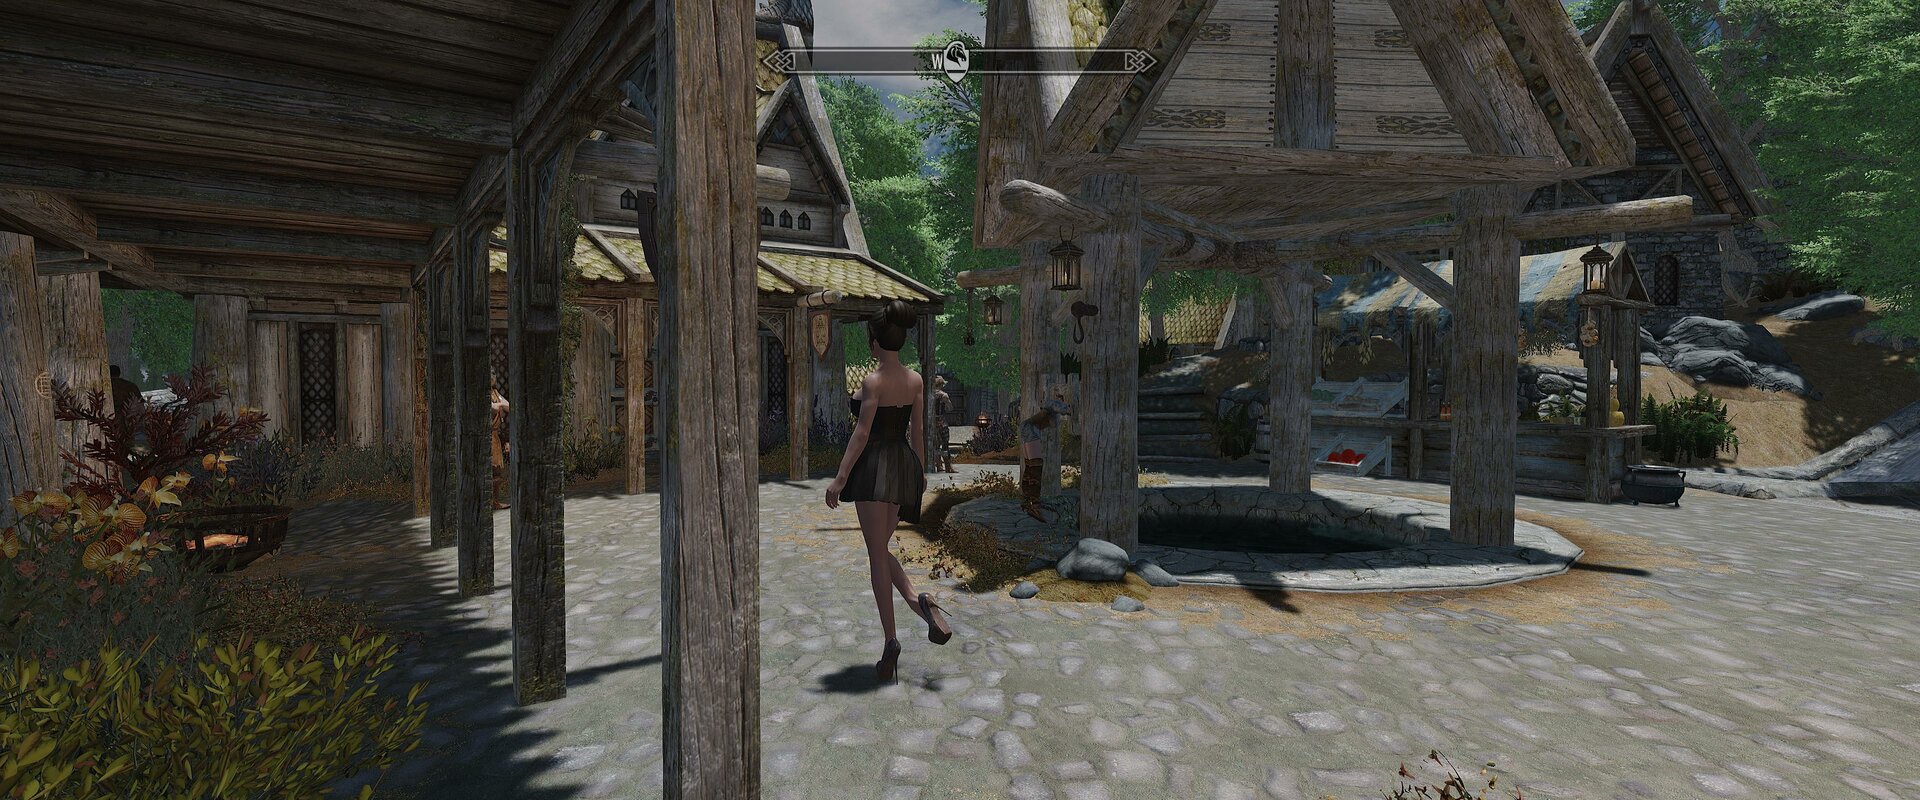 Zaz Animation Pack Zap Page 27 Downloads Skyrim Adult And Sex Mods Loverslab 4470